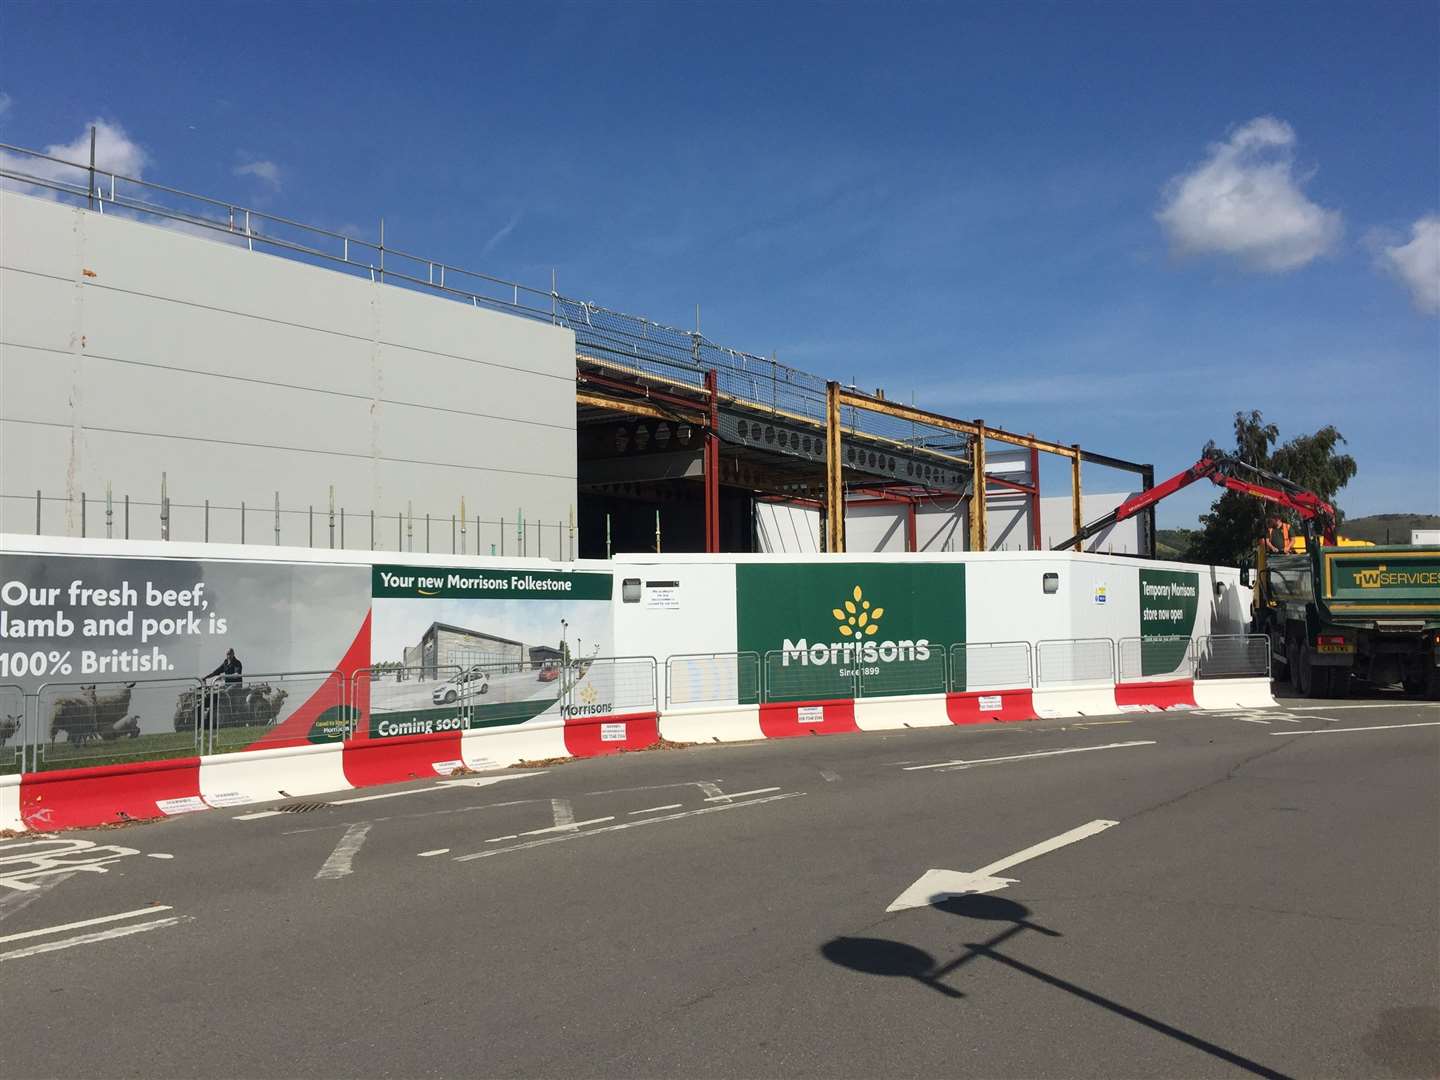 The new Morrisons supermarket is coming along nicely